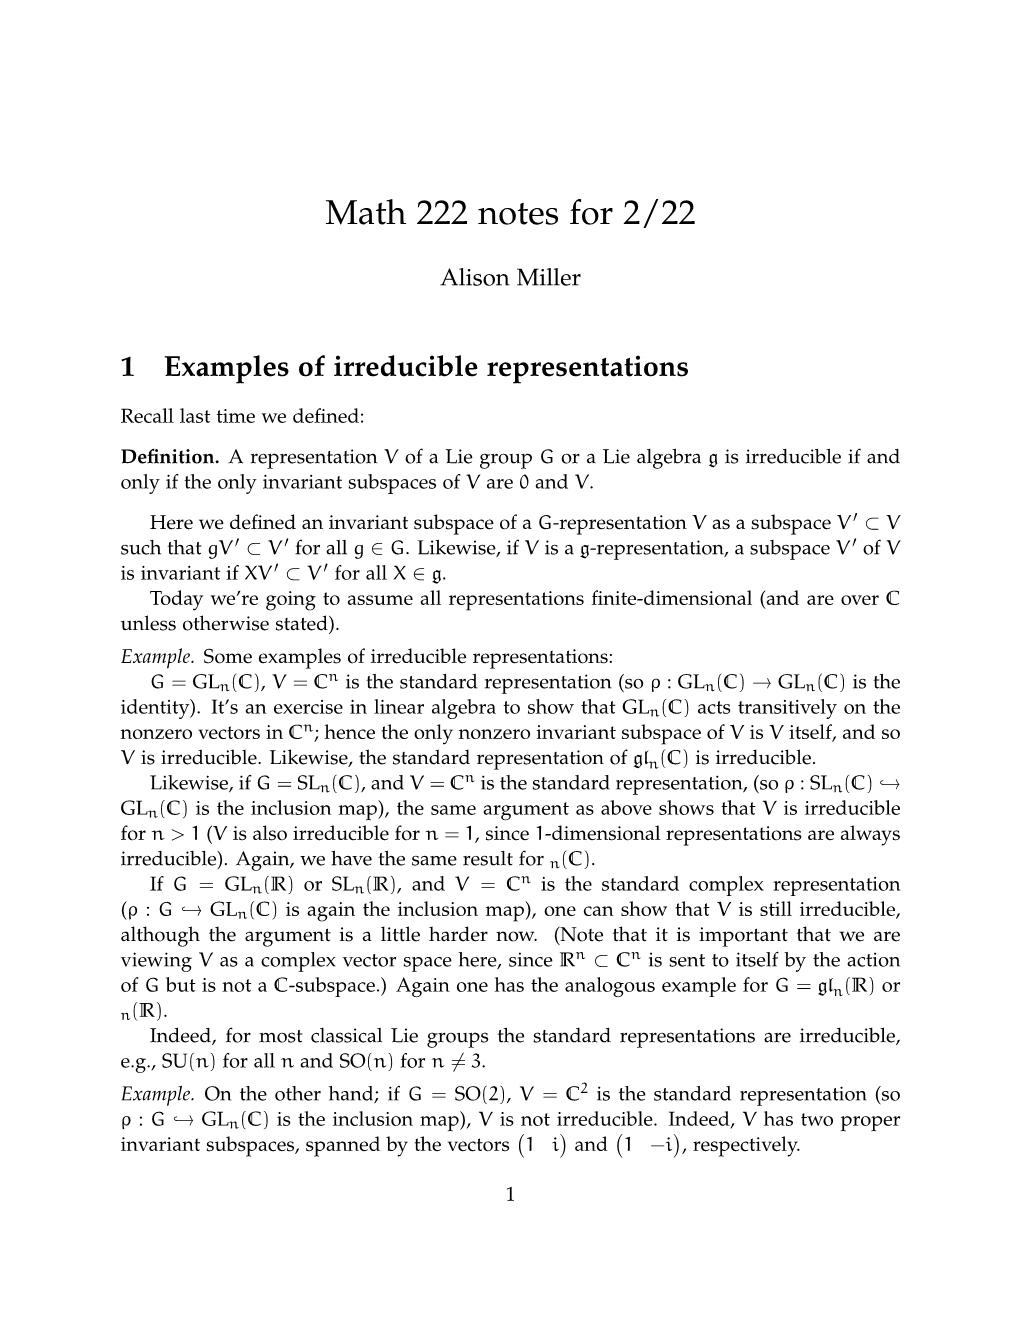 Math 222 Notes for 2/22